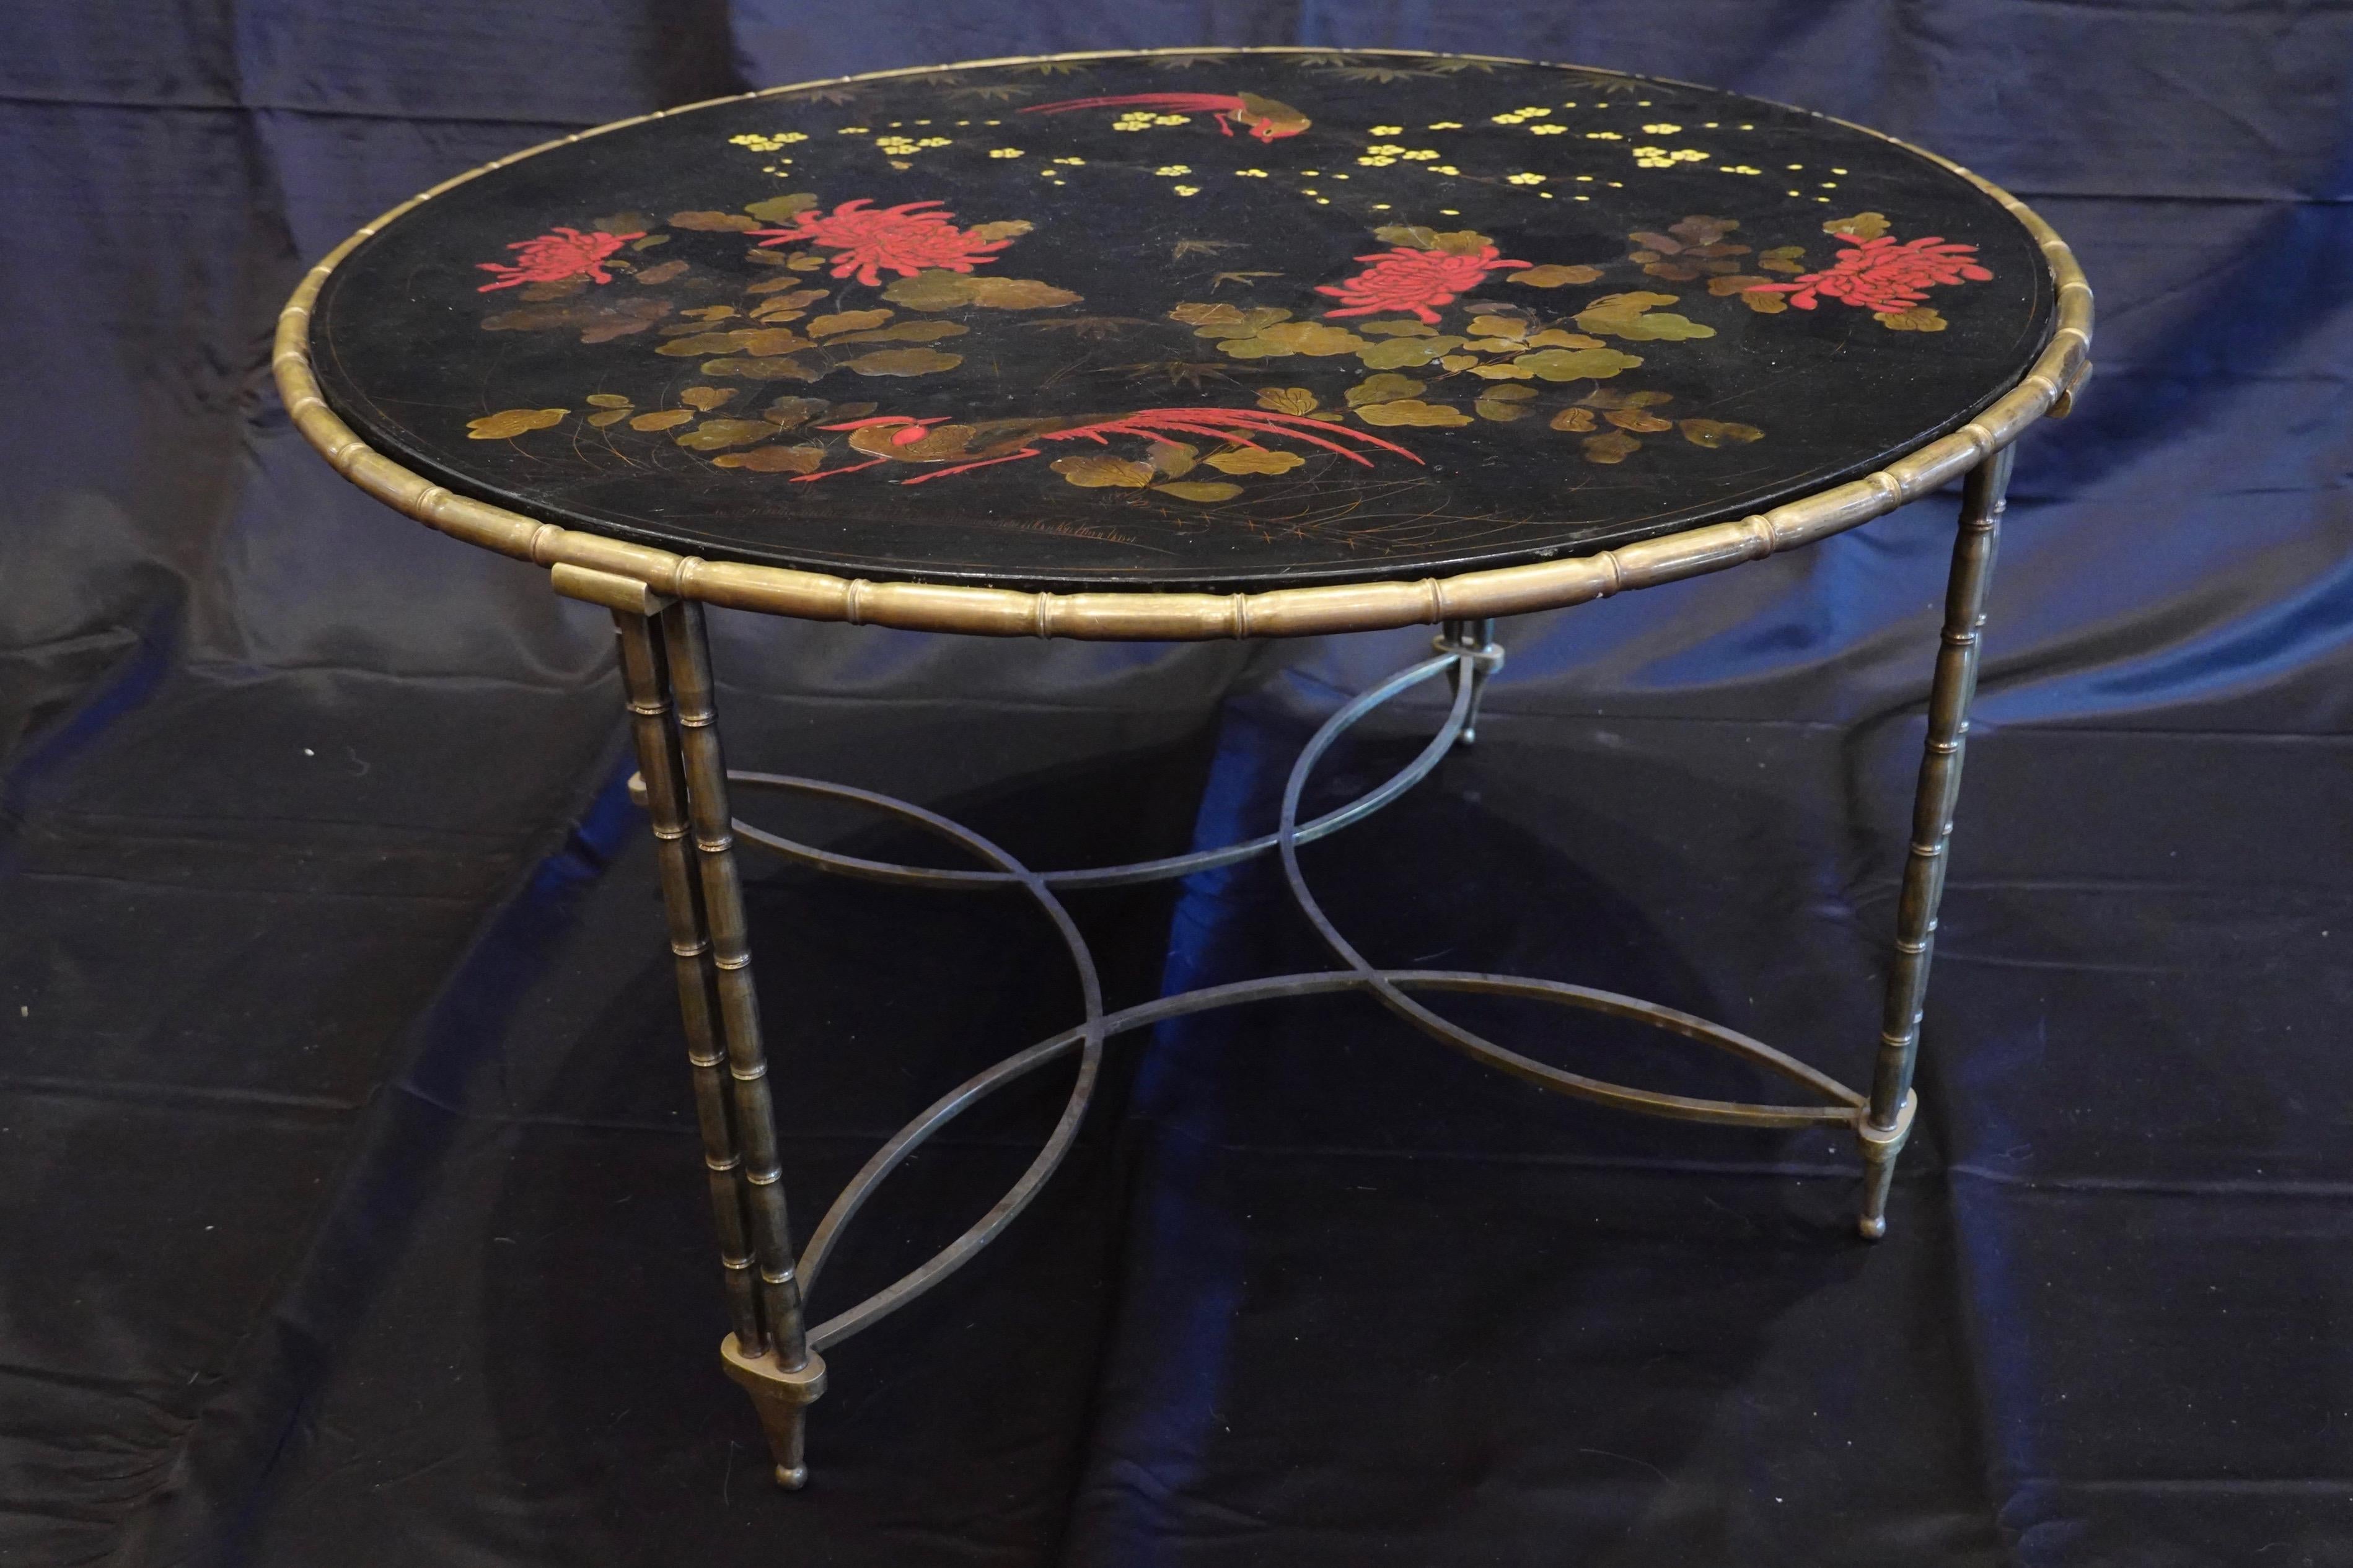 Chinoiserie Baguès Japanned Top Cocktail Table with Birds and Peonies